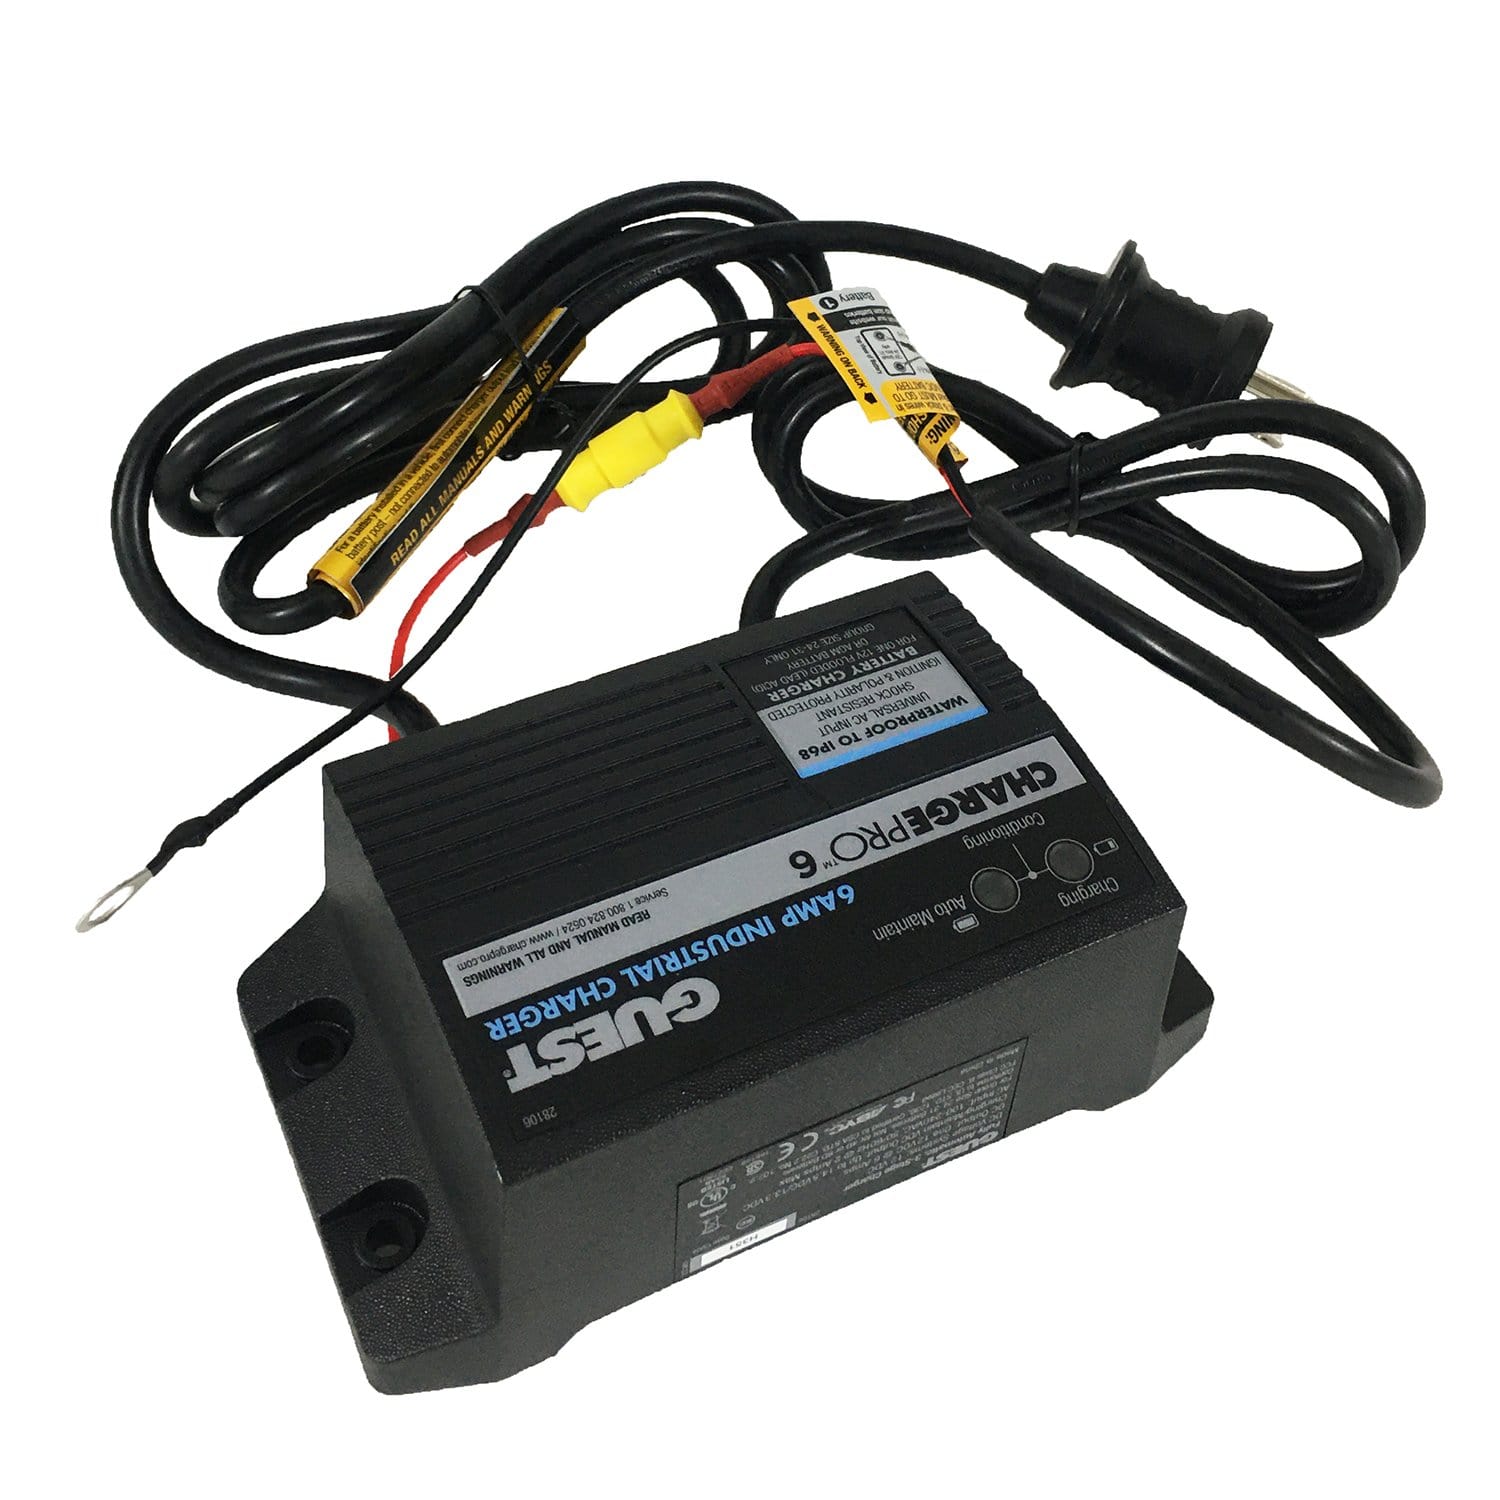 Guest 28106 Power Products On-Board Battery Charger, 6A / 12V, 1 Bank, 120V Input